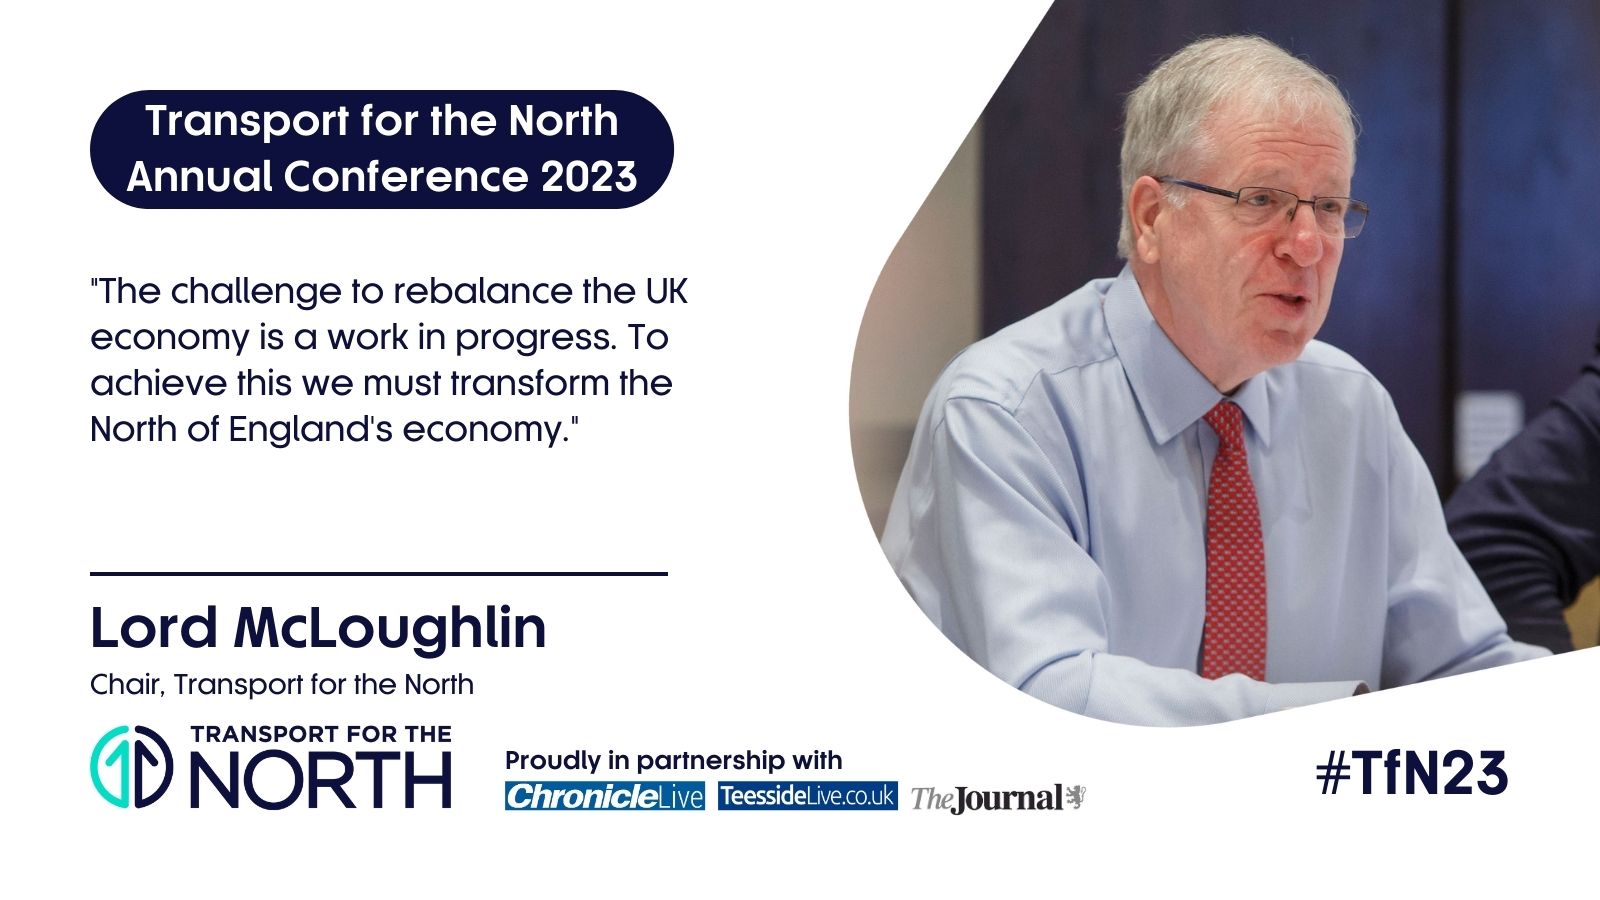 Lord McLoughlin on the need to rebalance the economy in the UK.